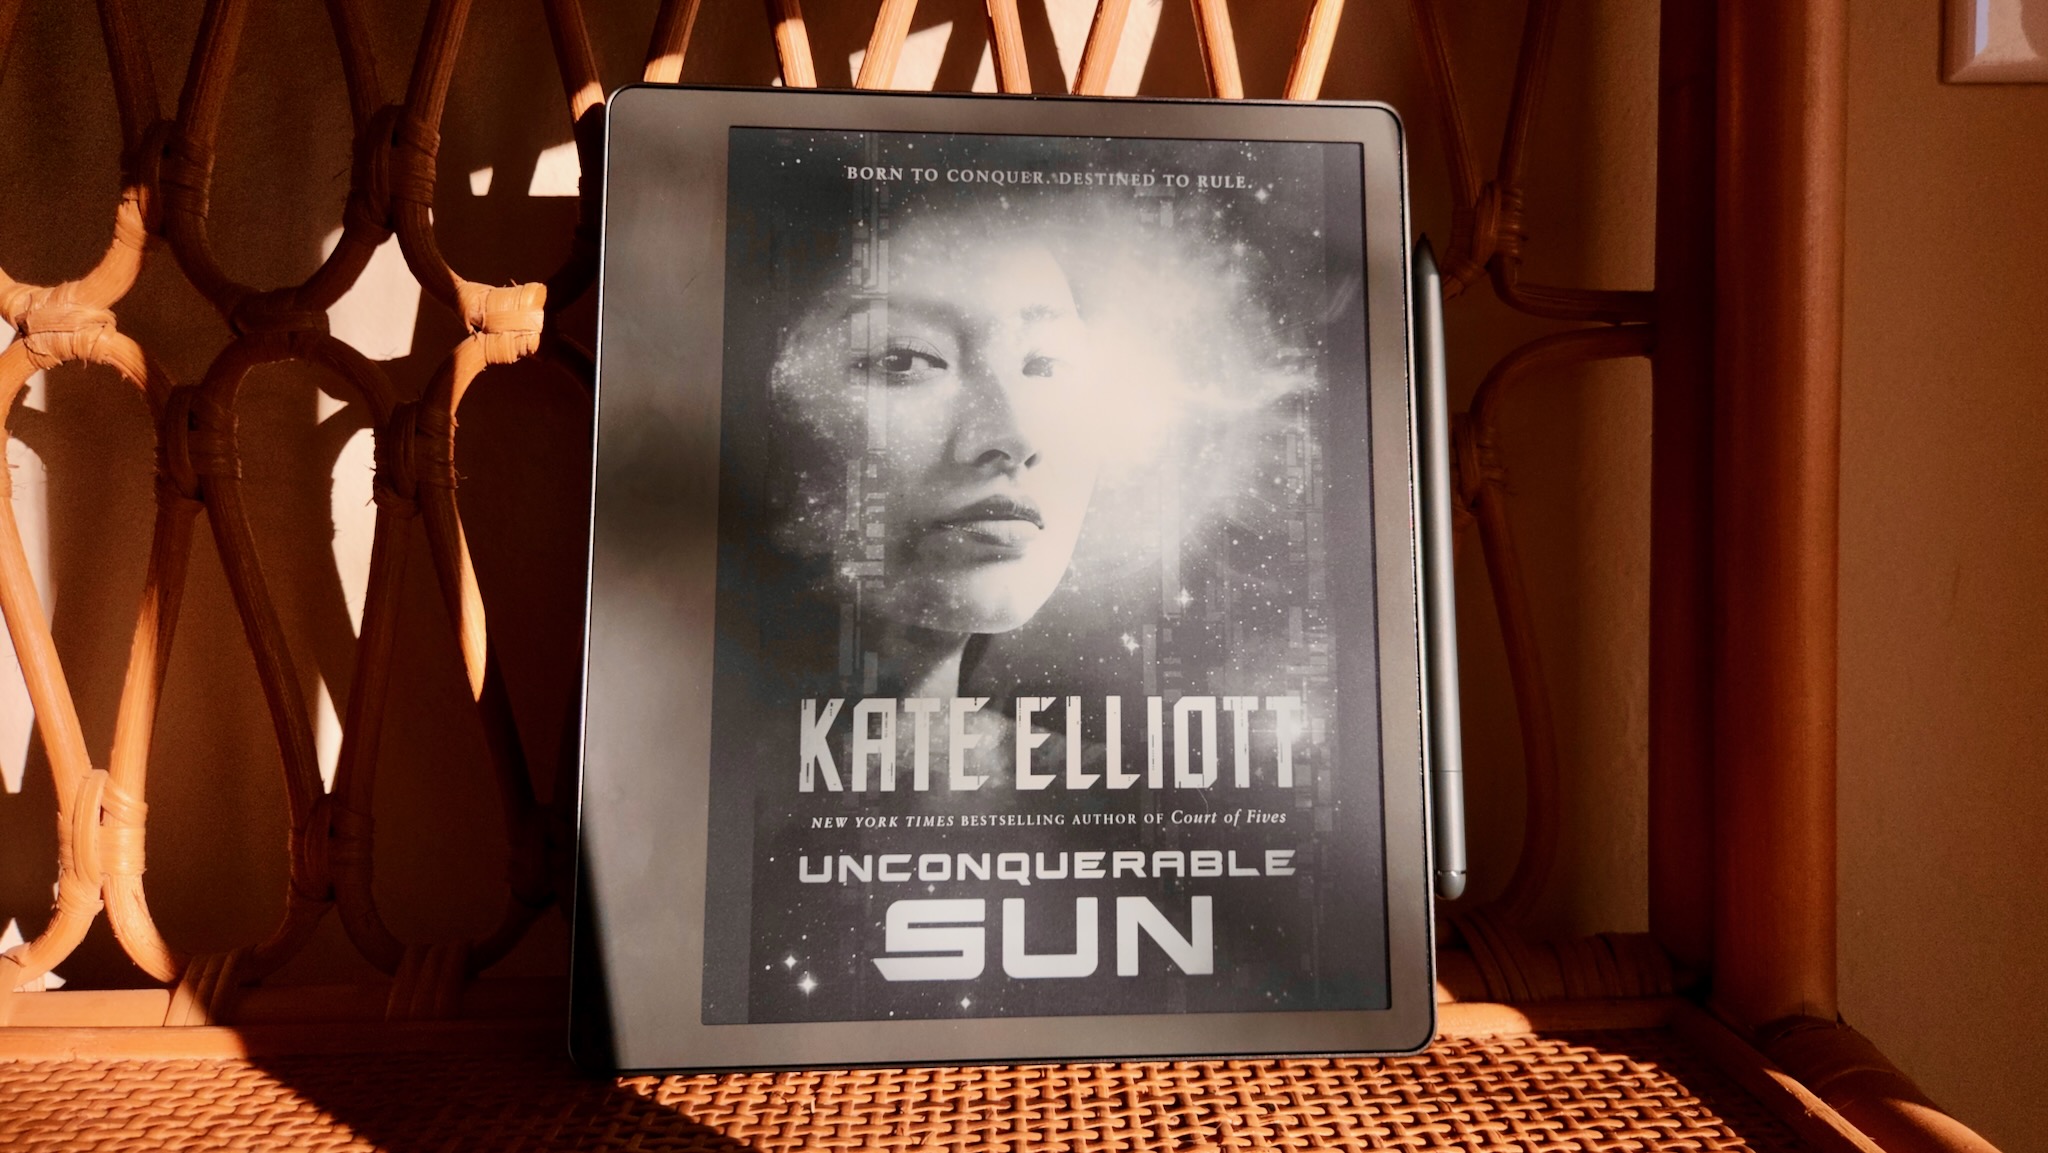 A close-up of the Amazon Kindle Scribe showing an e-book cover for Unconquerable Sun by Kate Elliot